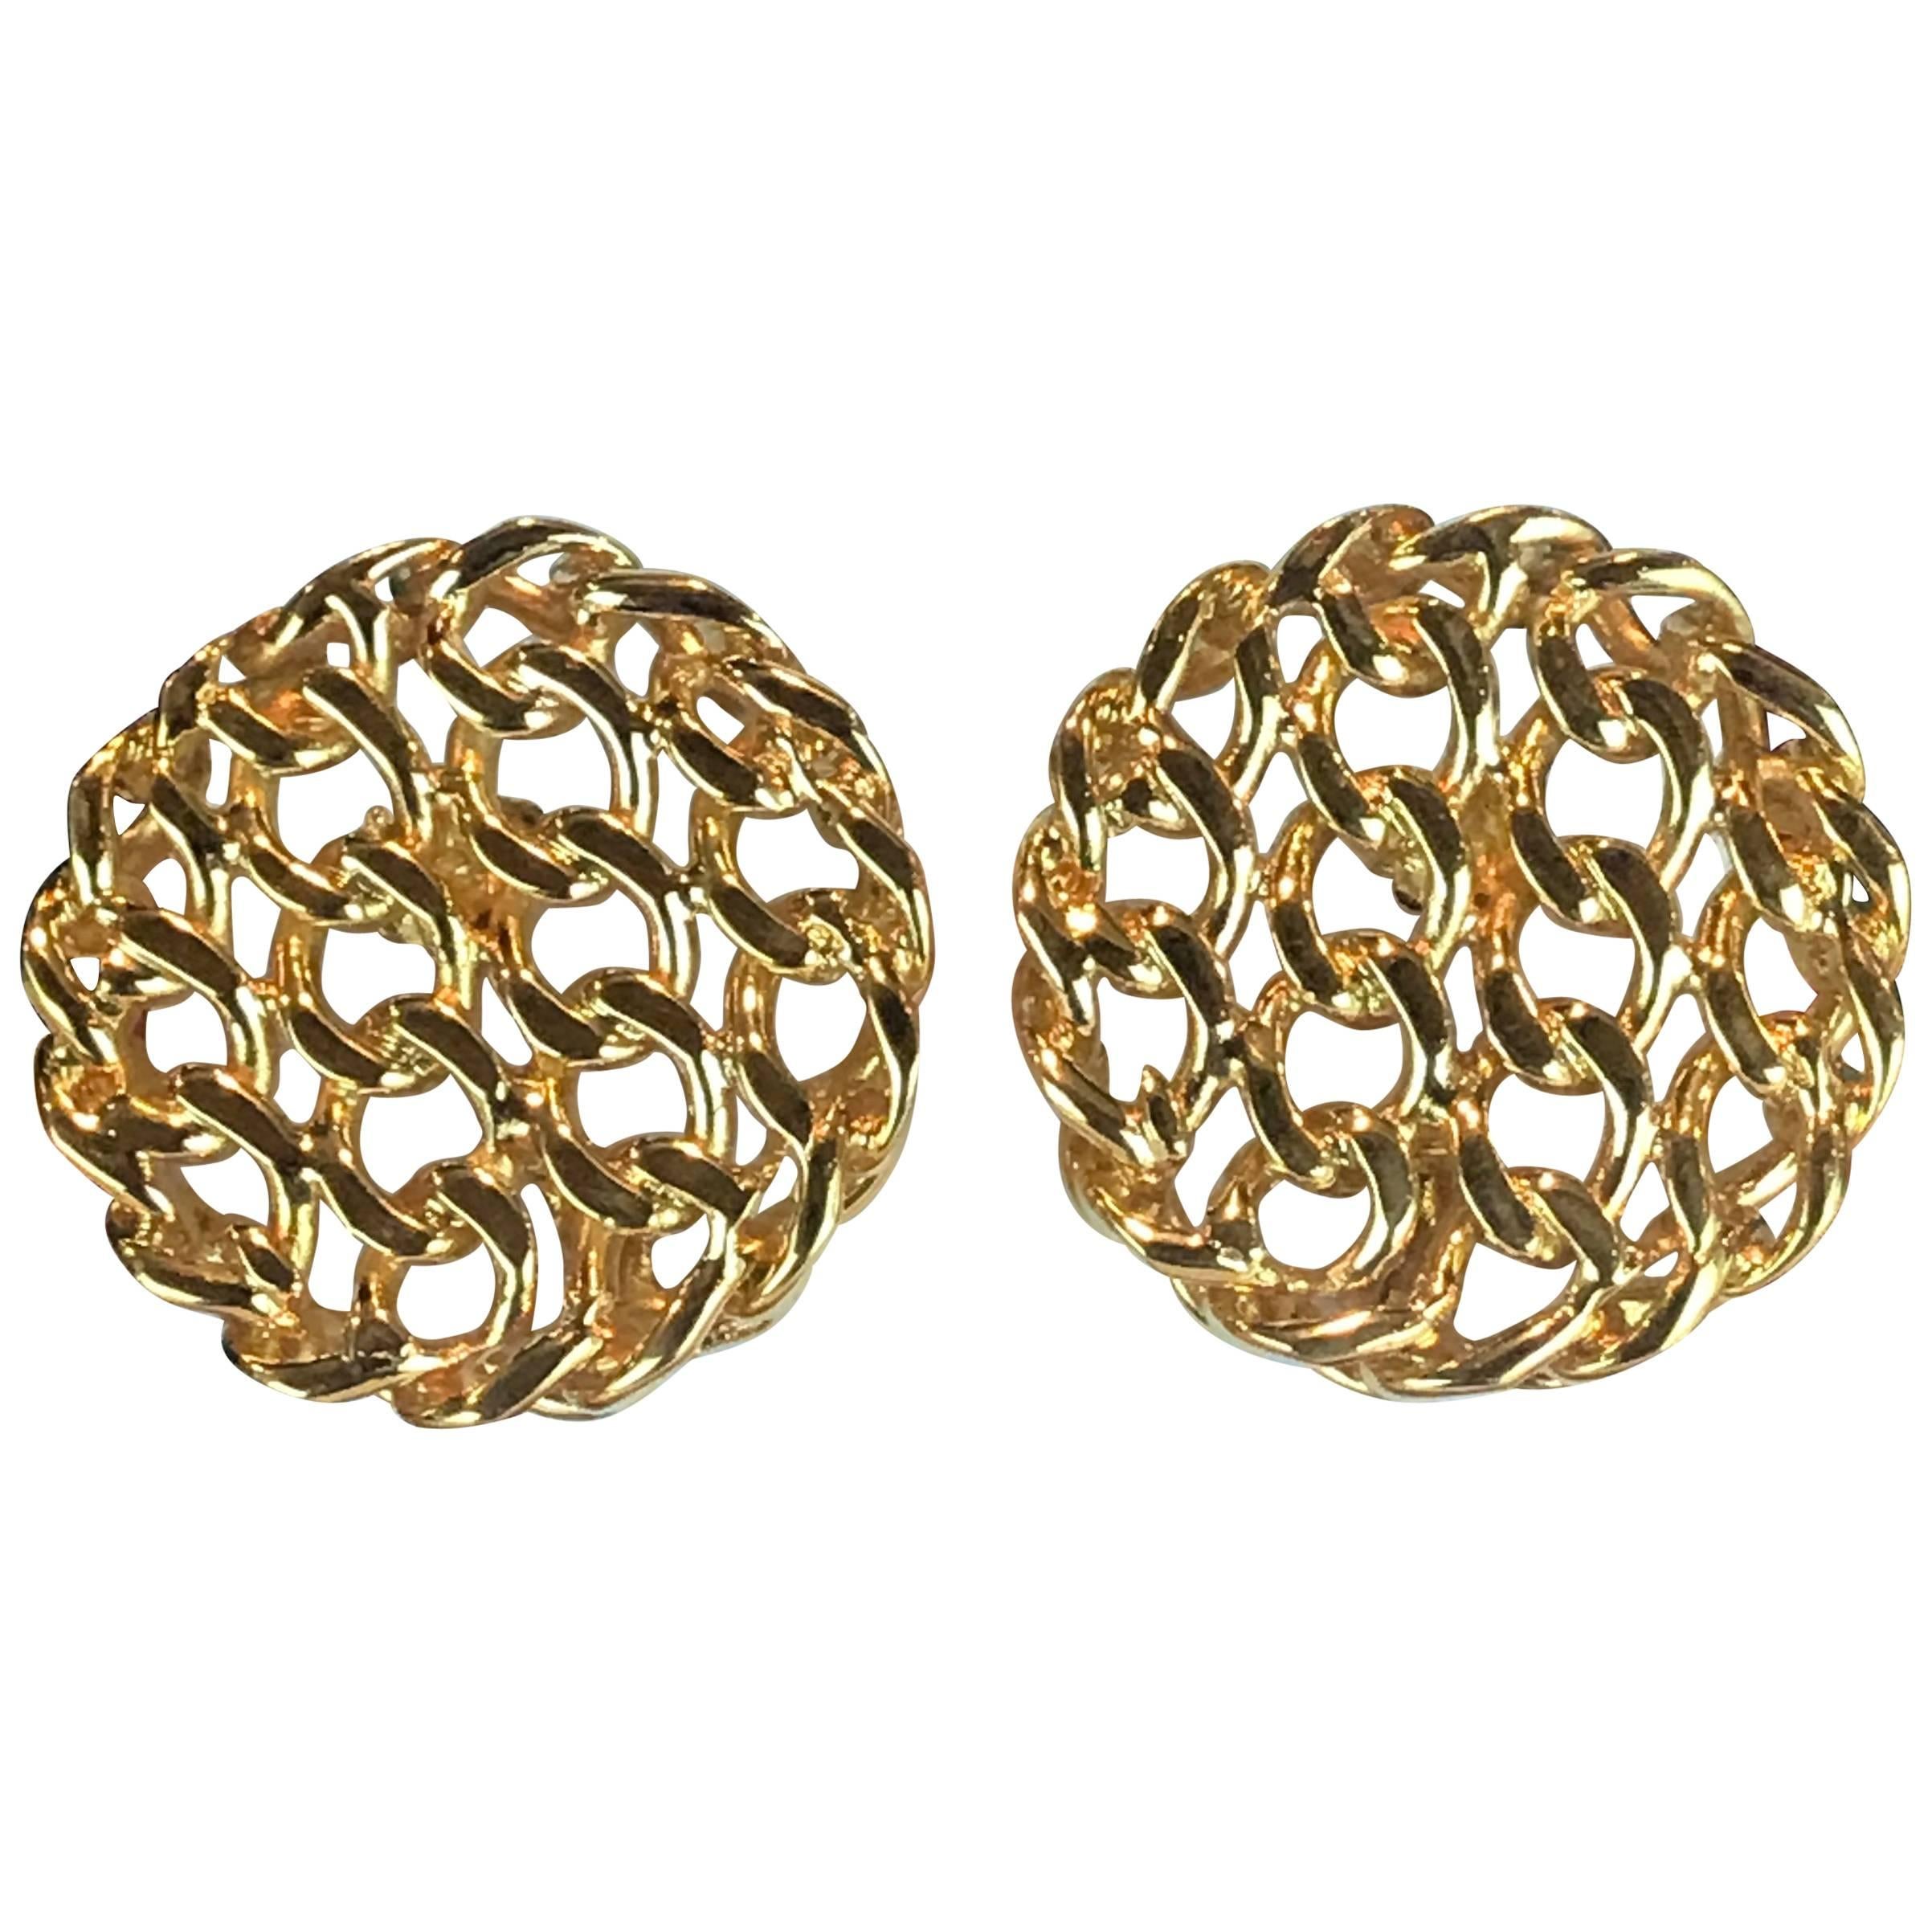 Chanel Signature Chain Link Earrings